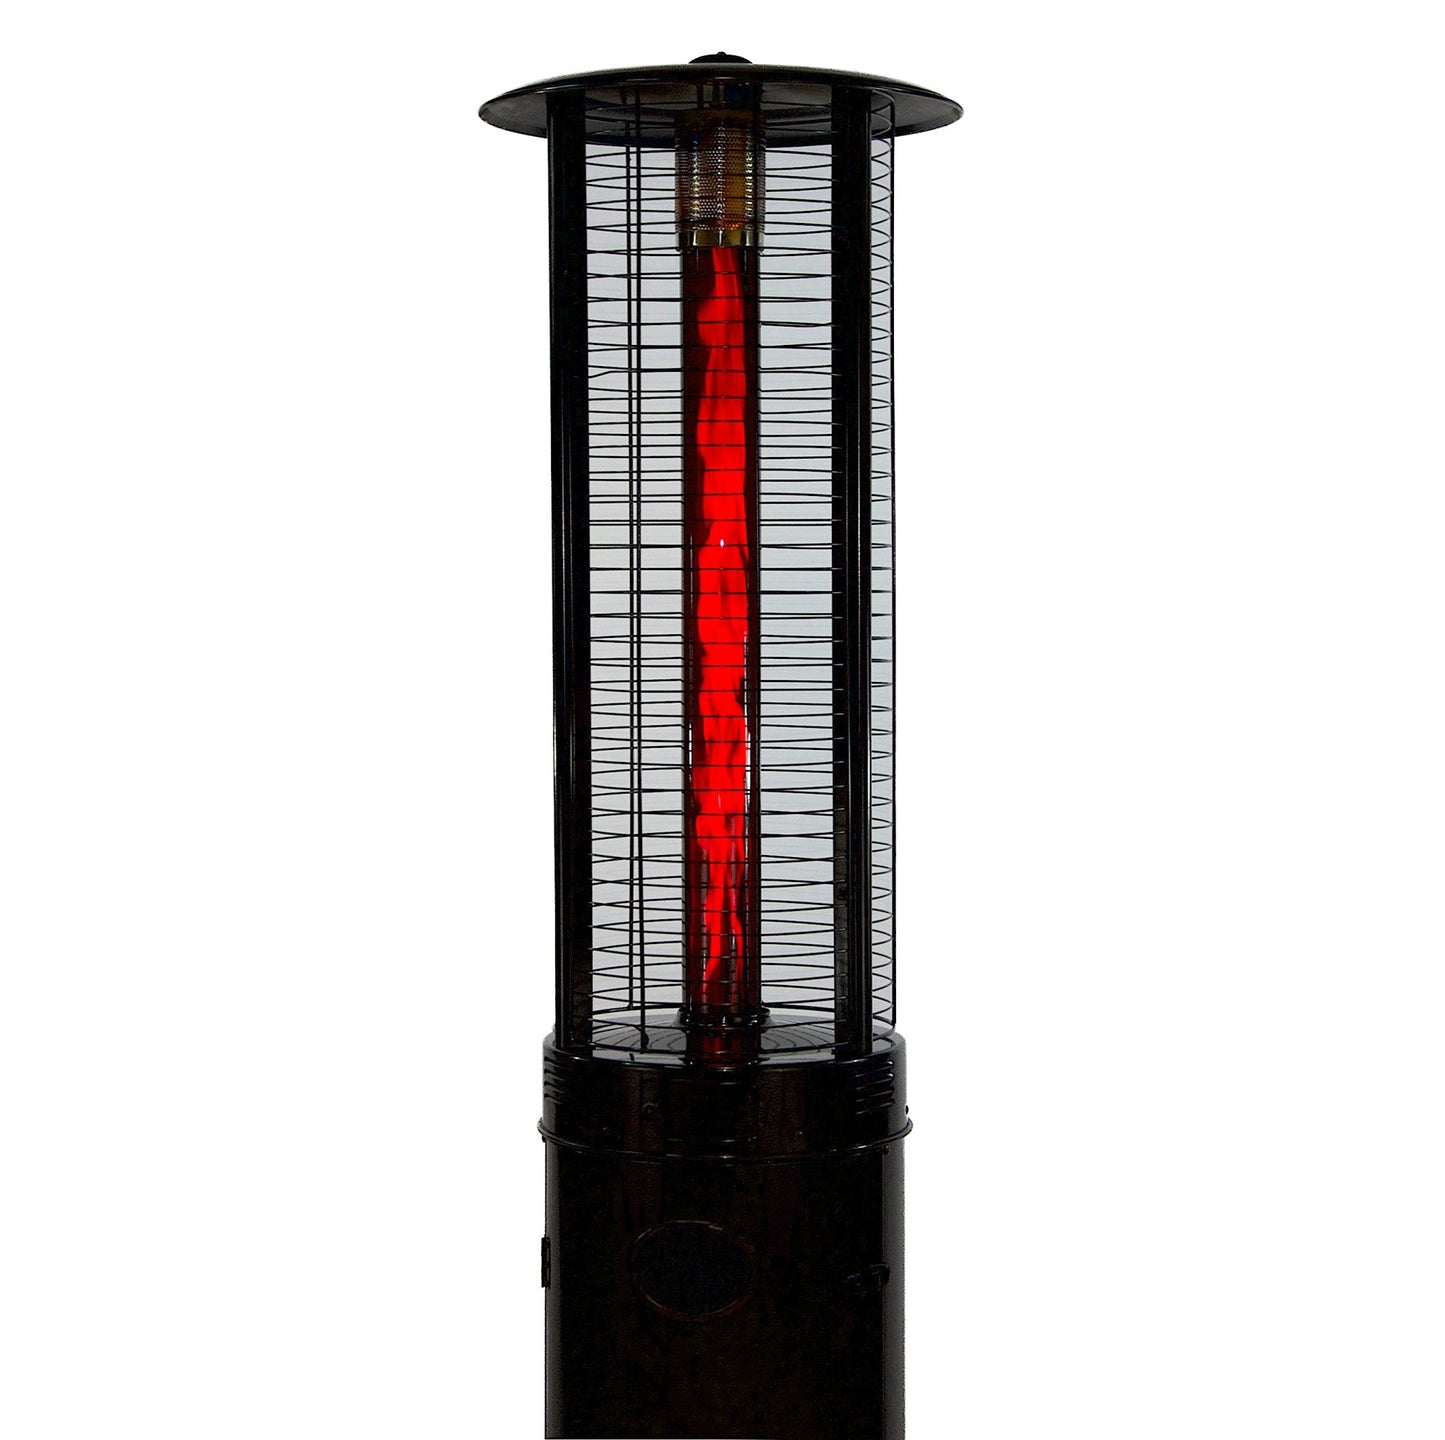 -80" Ellipse Flame Propane Patio Heater - Black with Ruby Glass (41,000 BTU) - Outdoor Style Company